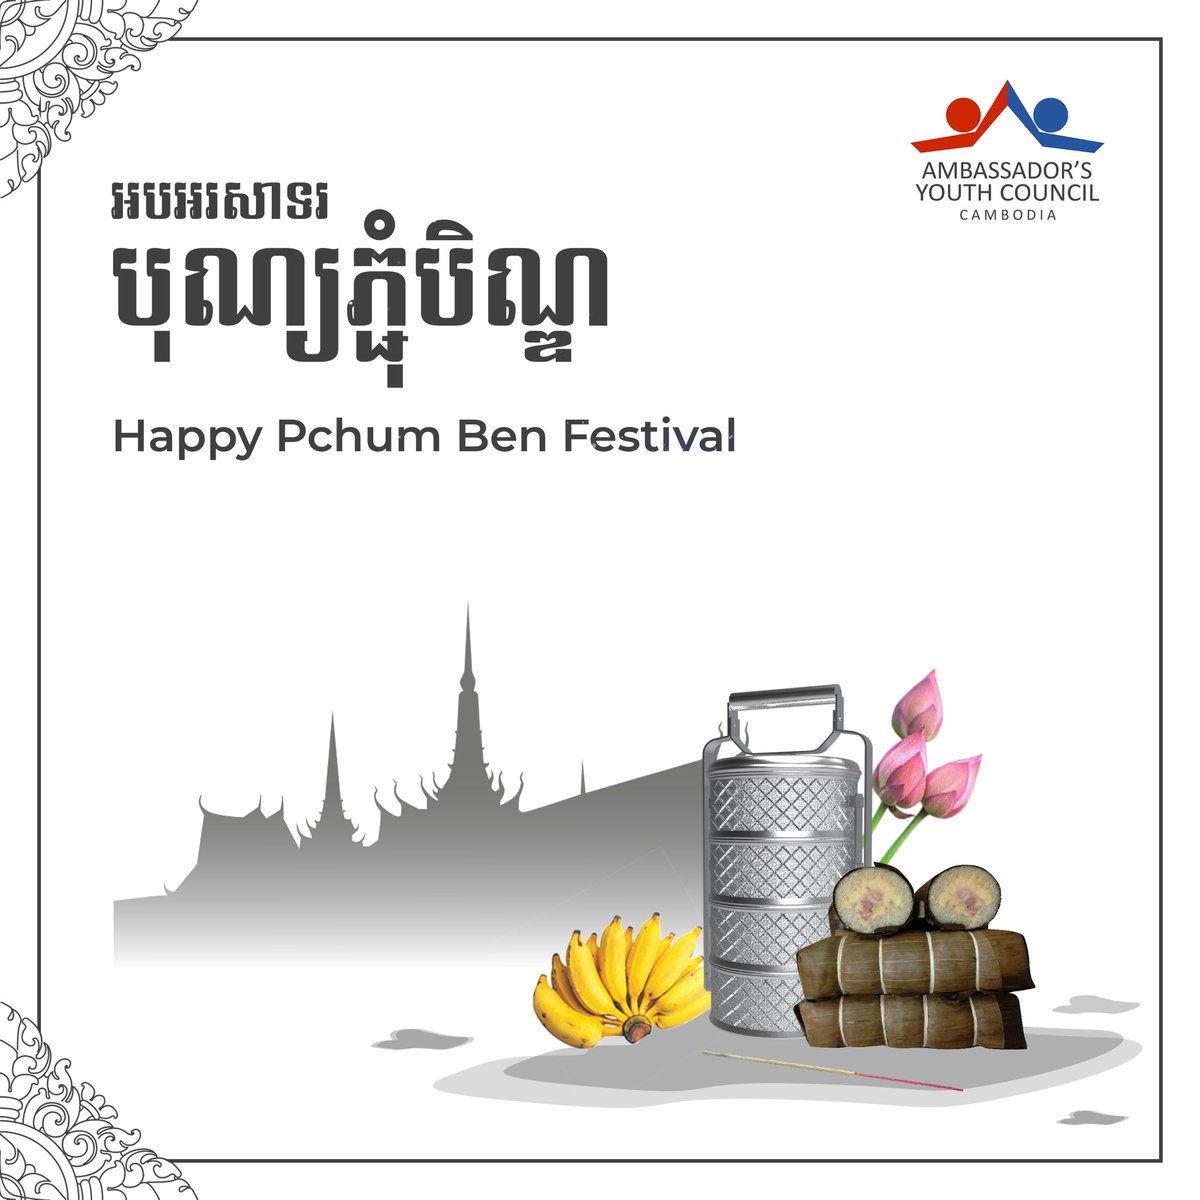 On the occasion of Pchum Ben Festival, we would like to extend our warm wishes to you and your family. We wish you a safe and joyful holiday. Happy Pchum Ben! #USAYCkh